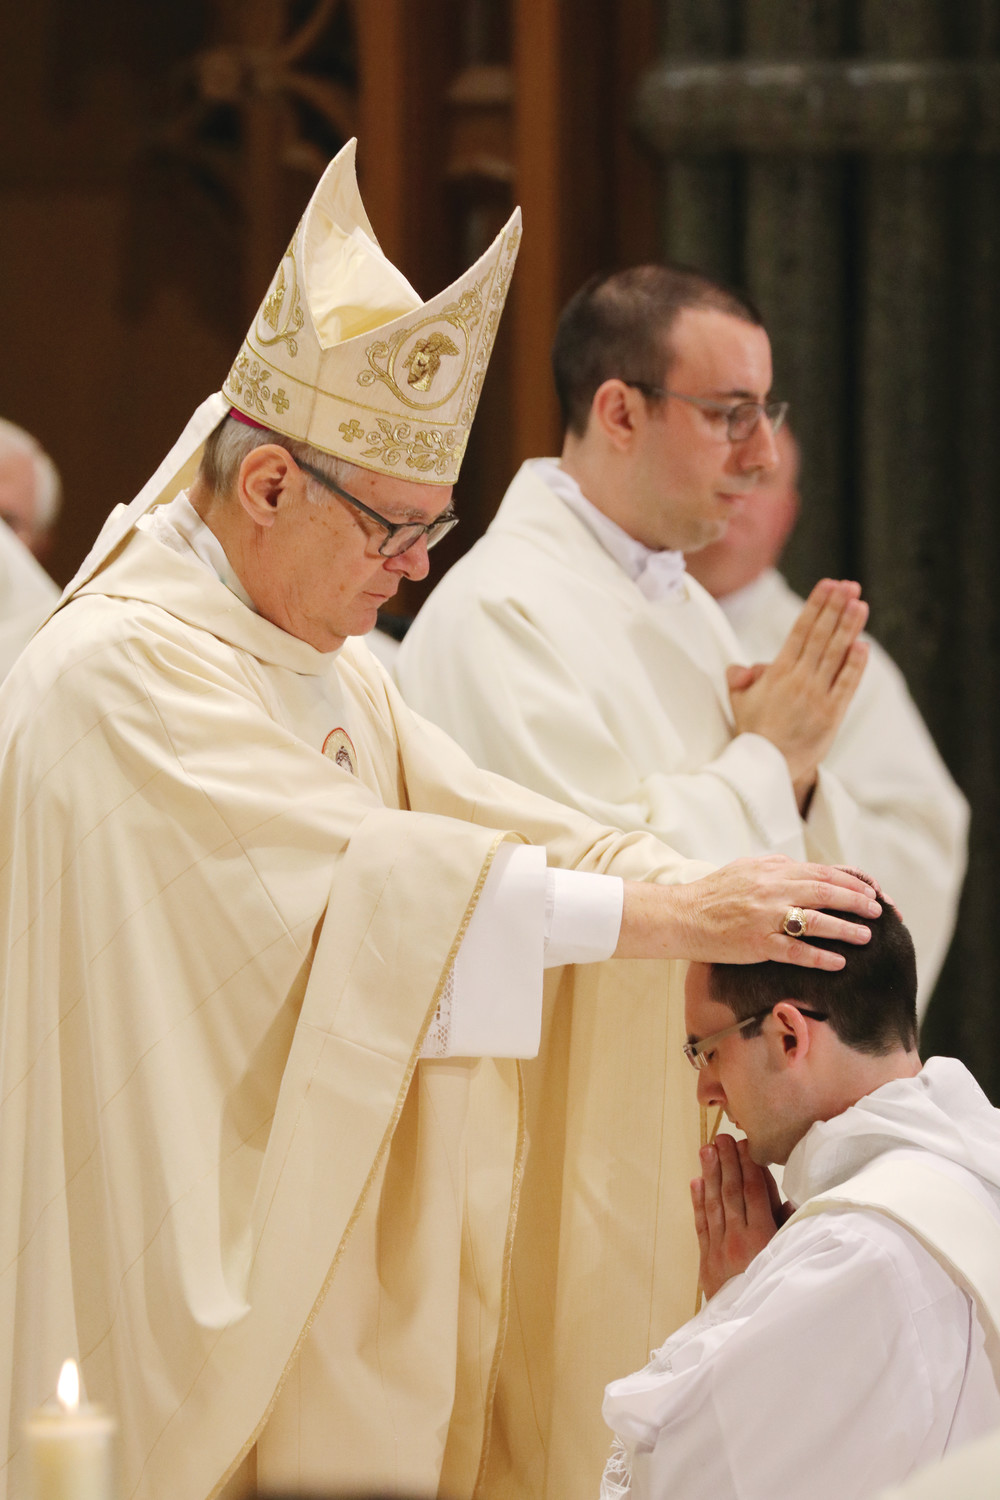 Bishop Thomas J. Tobin lays his hands upon the head of the elect, marking the moment that Father Phillip Dufour is welcomed into the priesthood.